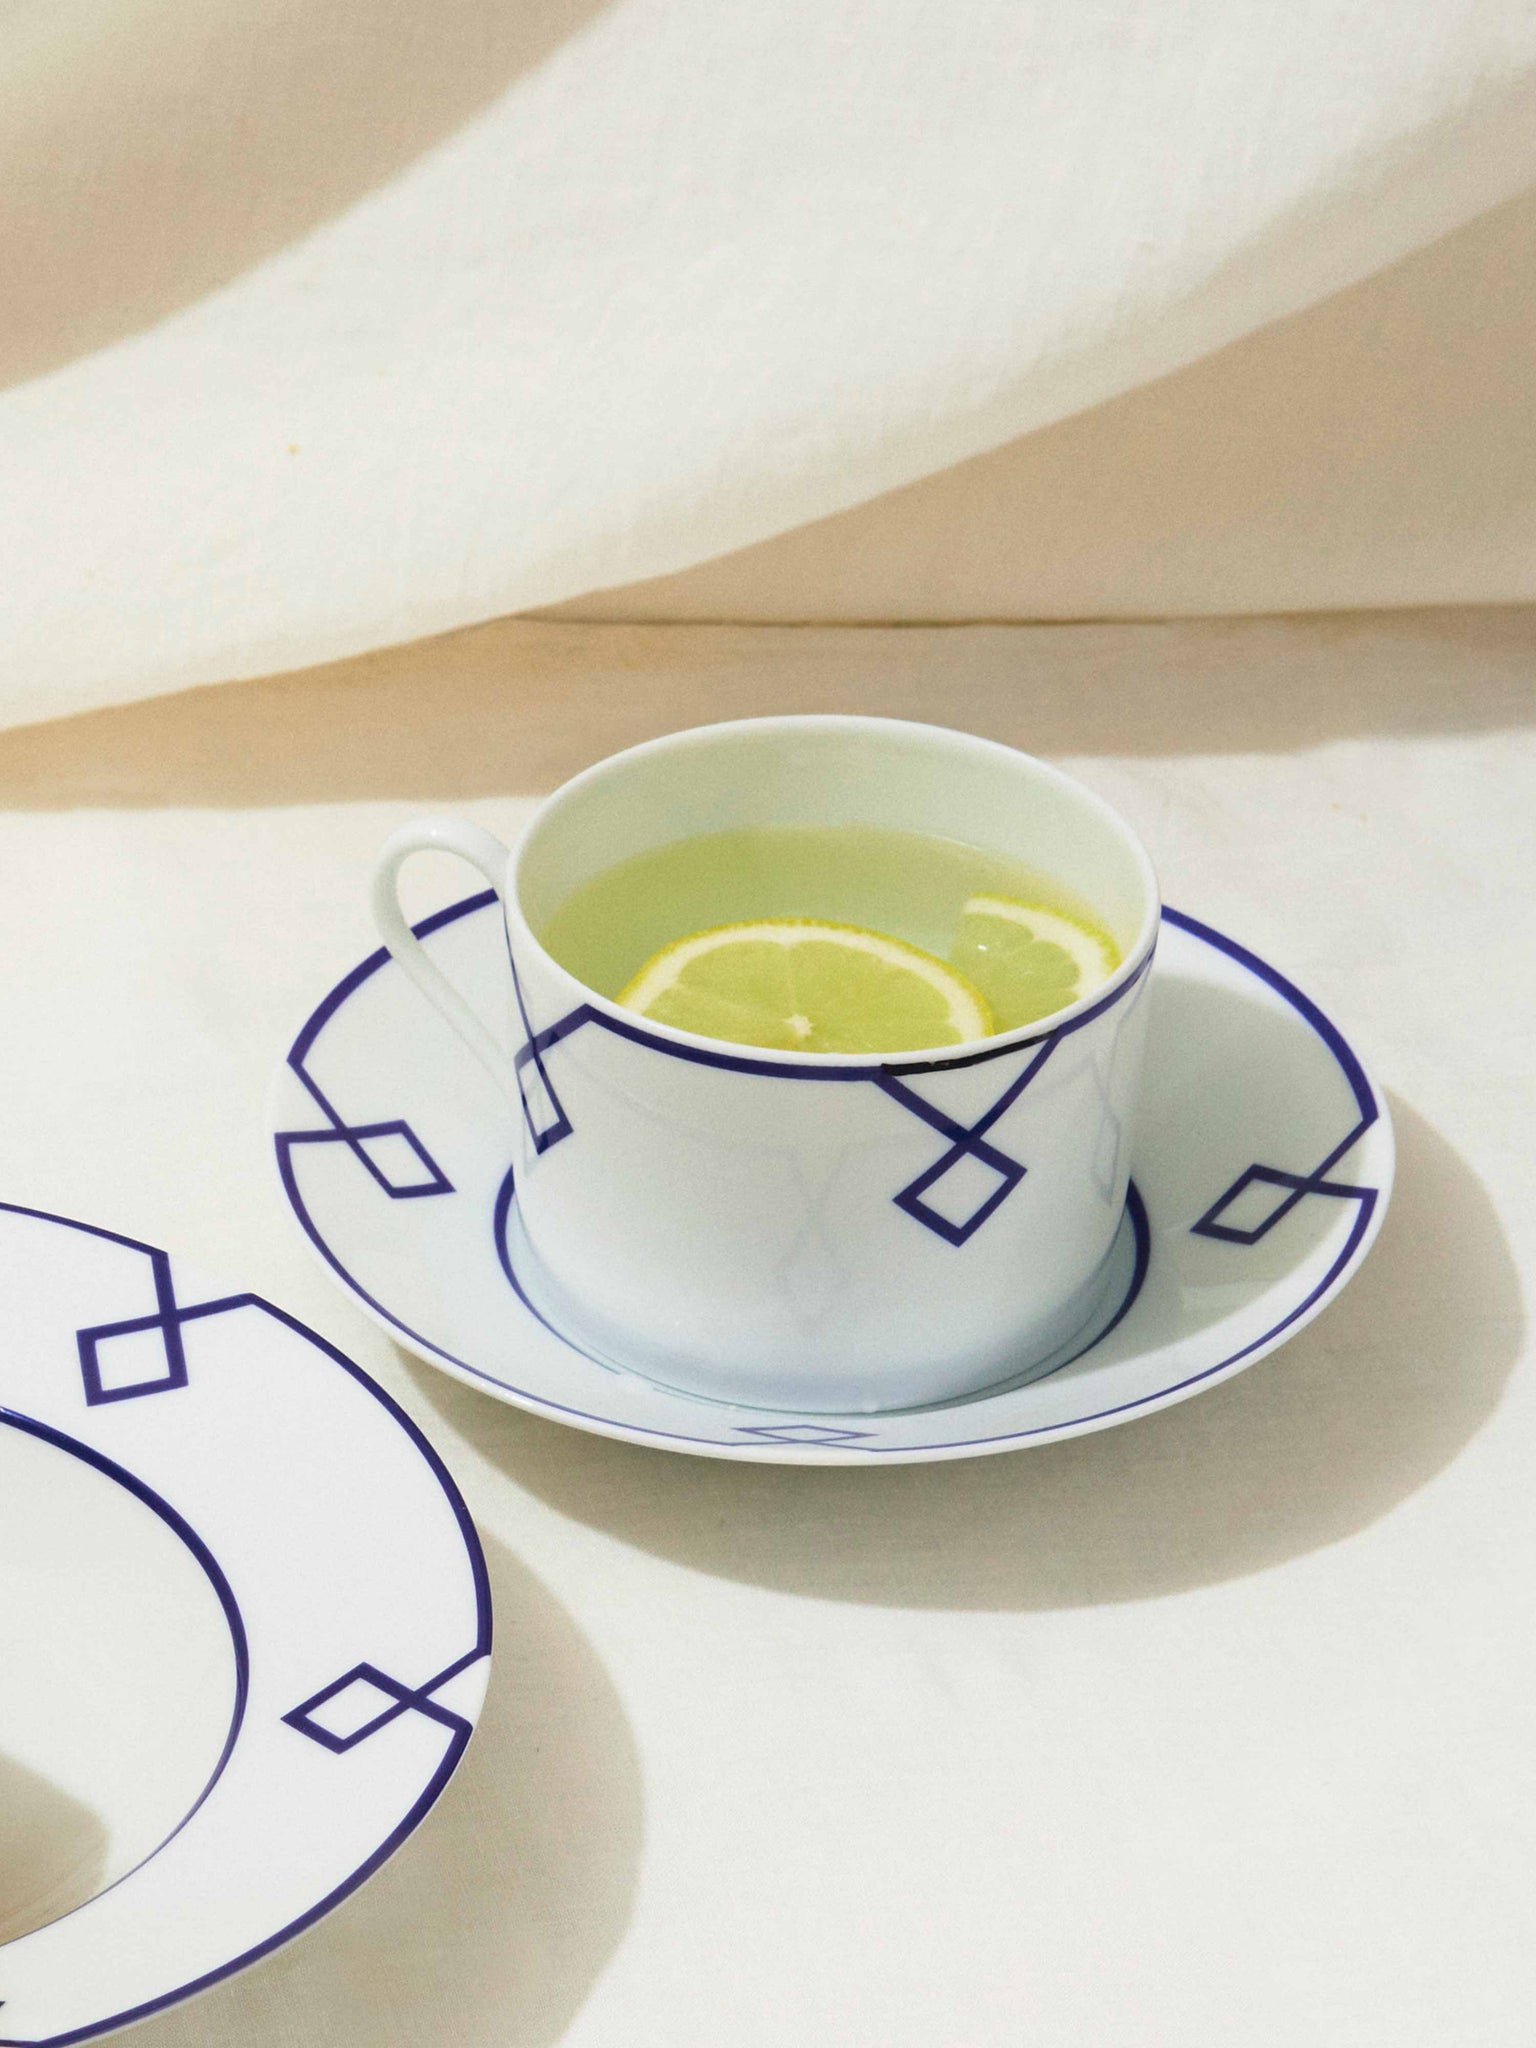 Naples Tea Cup and Saucer with Navy Geometric Border